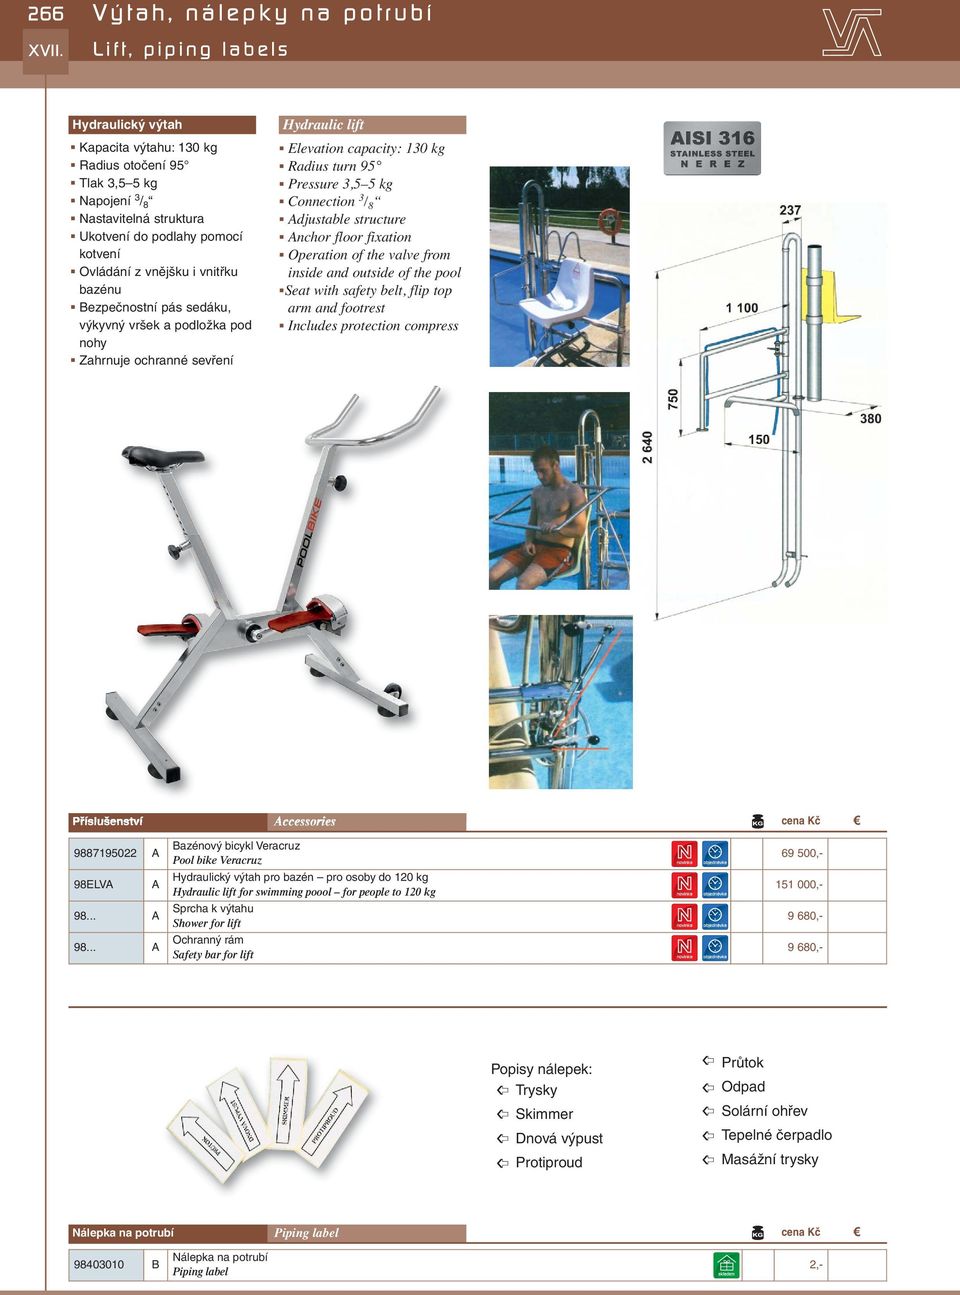 Connection 3 / 8 djustable structure nchor floor fixation Operation of the valve from inside and outside of the pool Seat with safety belt, flip top arm and footrest Includes protection compress